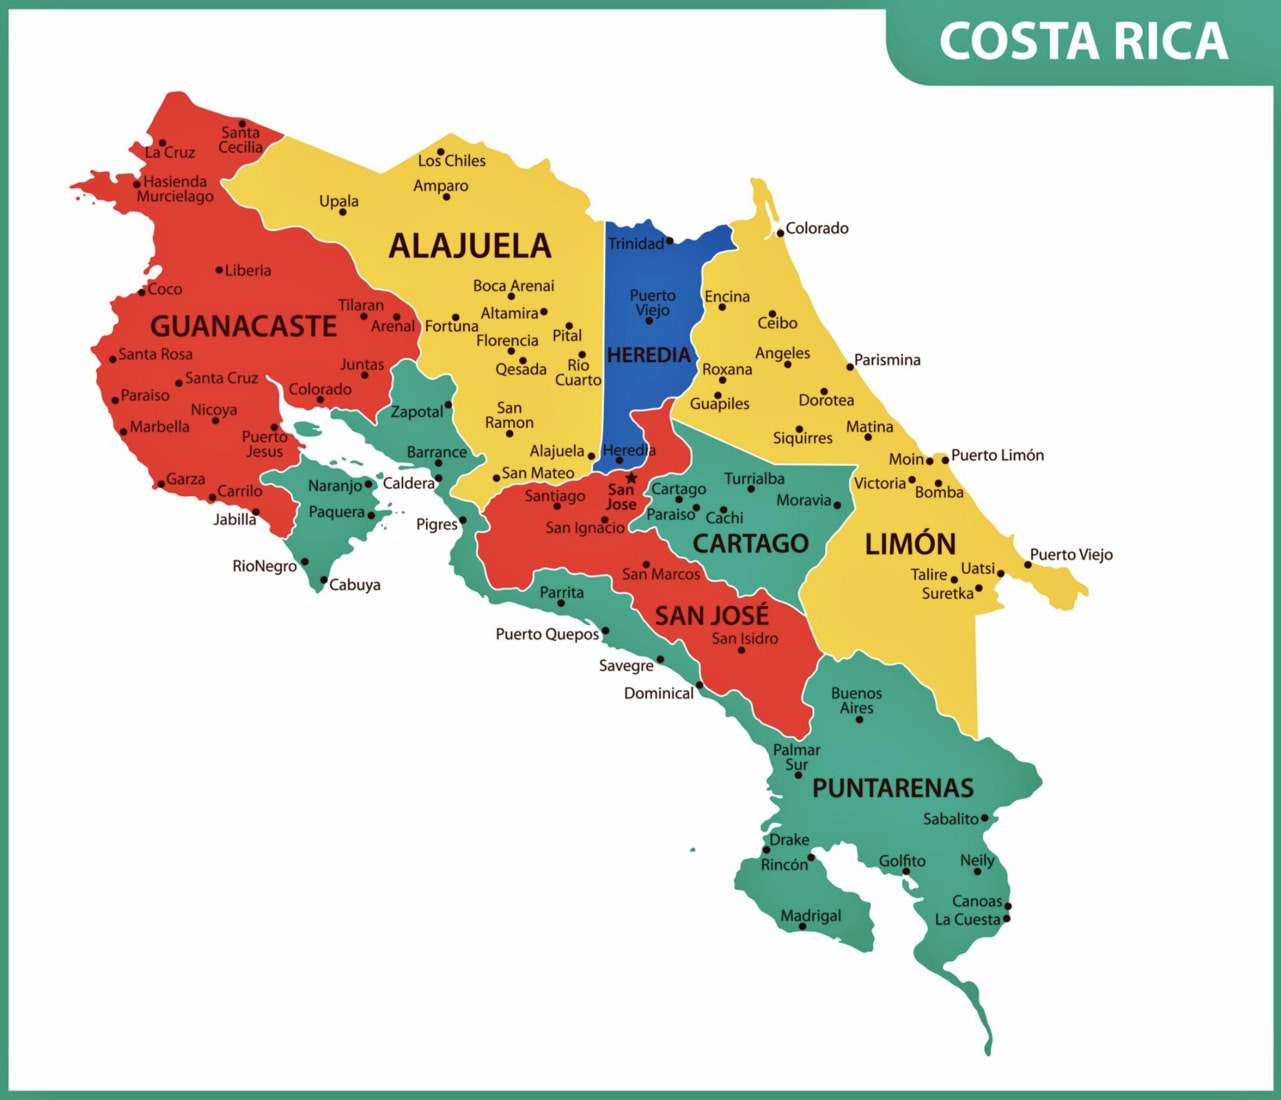 Map of Costa Rica with provinces